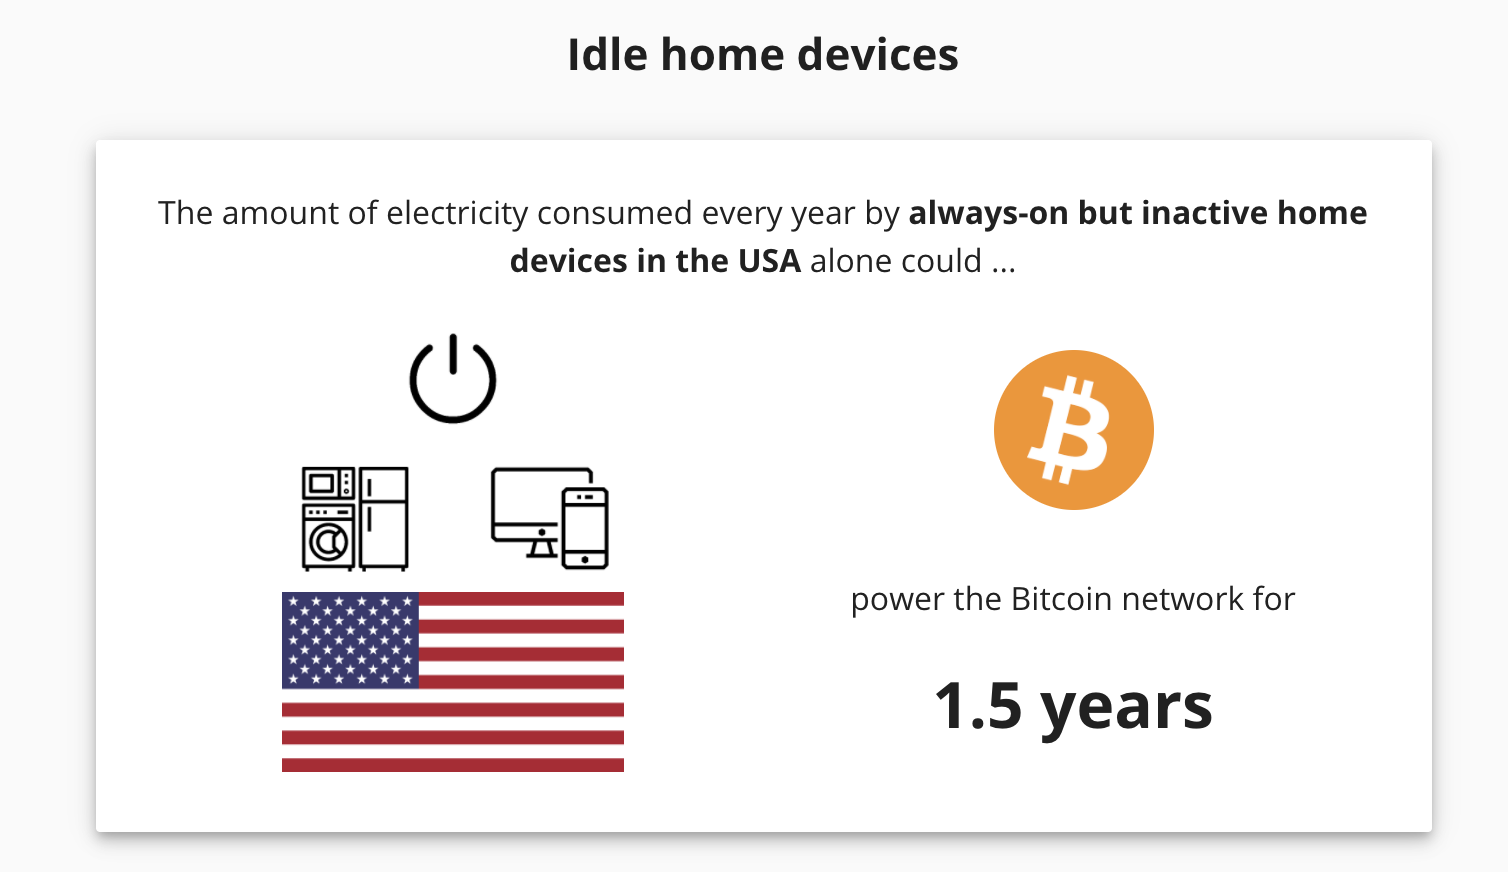 Idle devices can power bitcoin